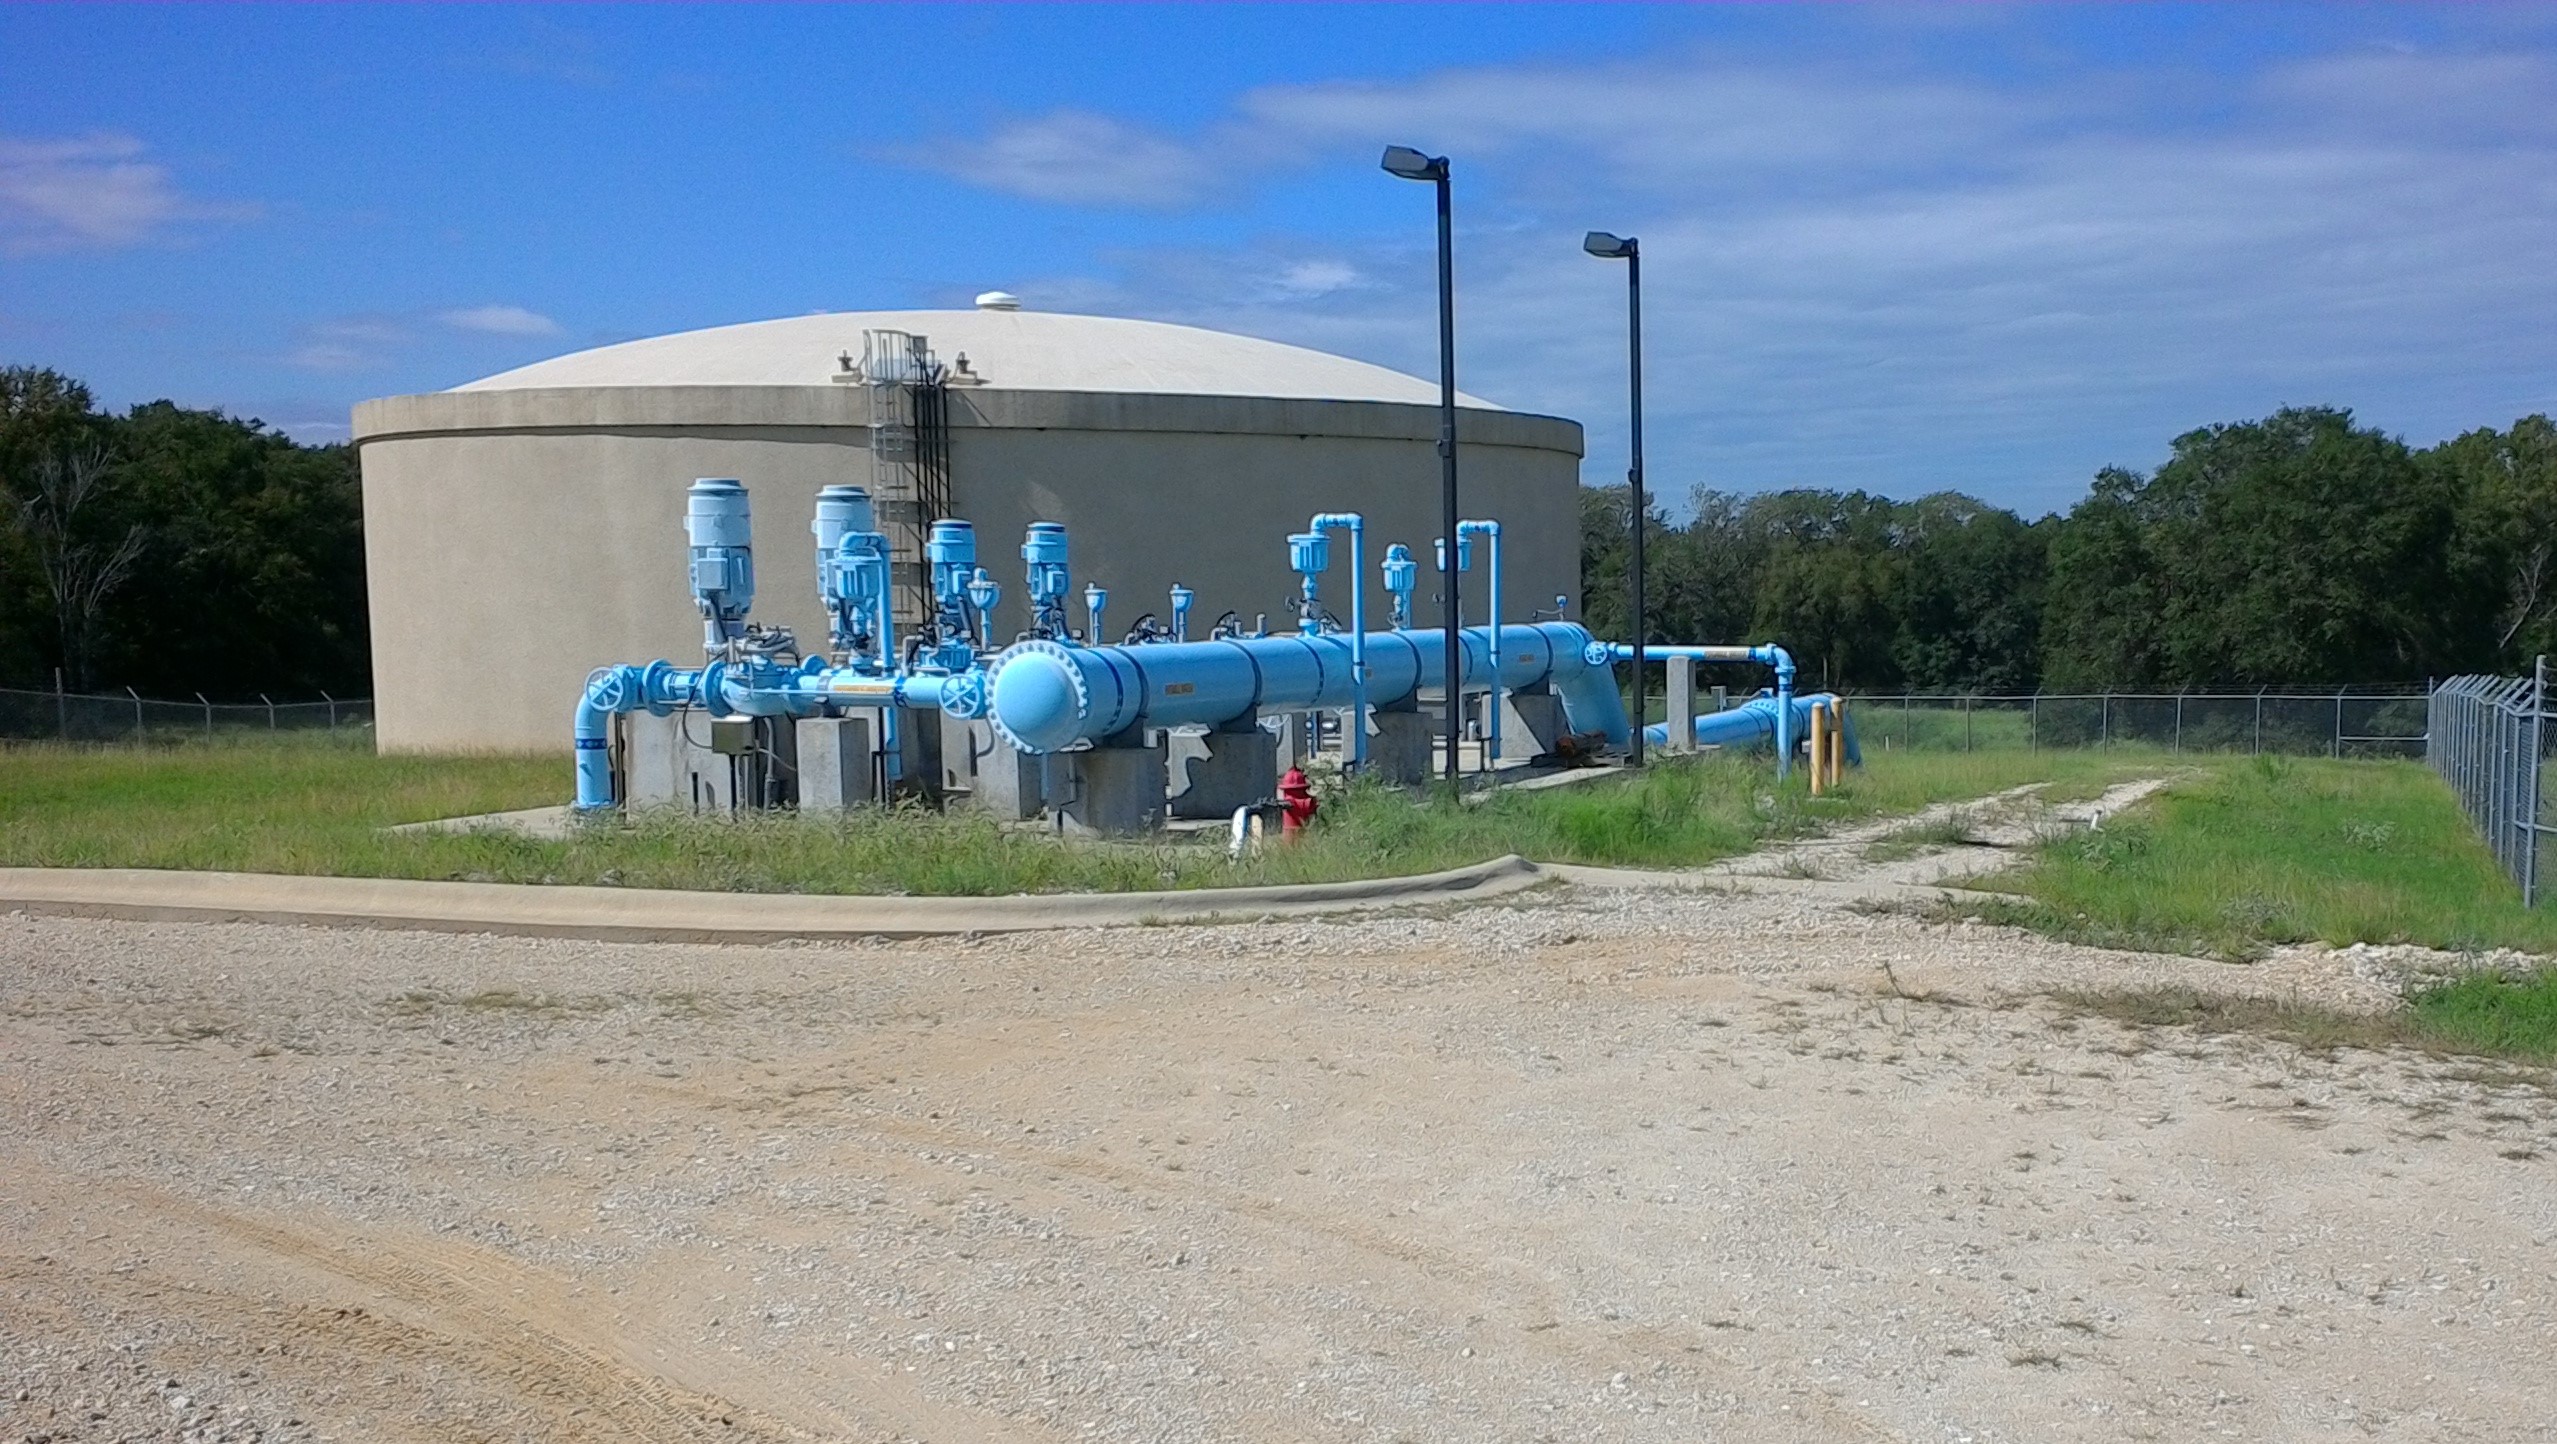 A water storage tank with blue pipes in front of it.